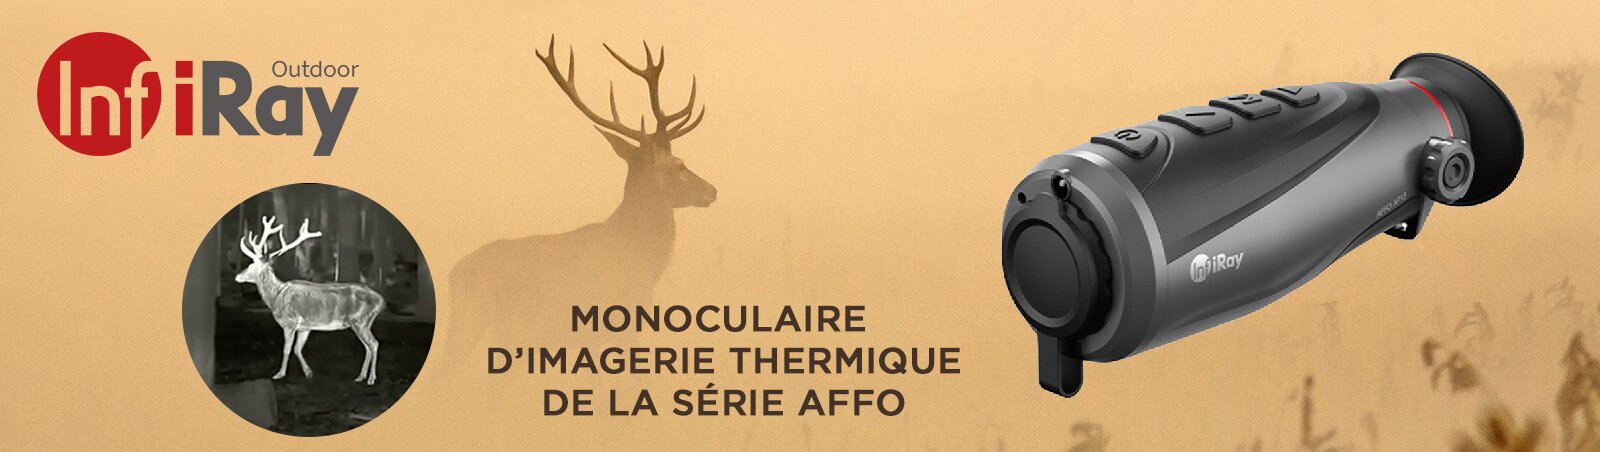 Monoculaire à imagerie thermique Infiray Outdoor AFFO SERIE